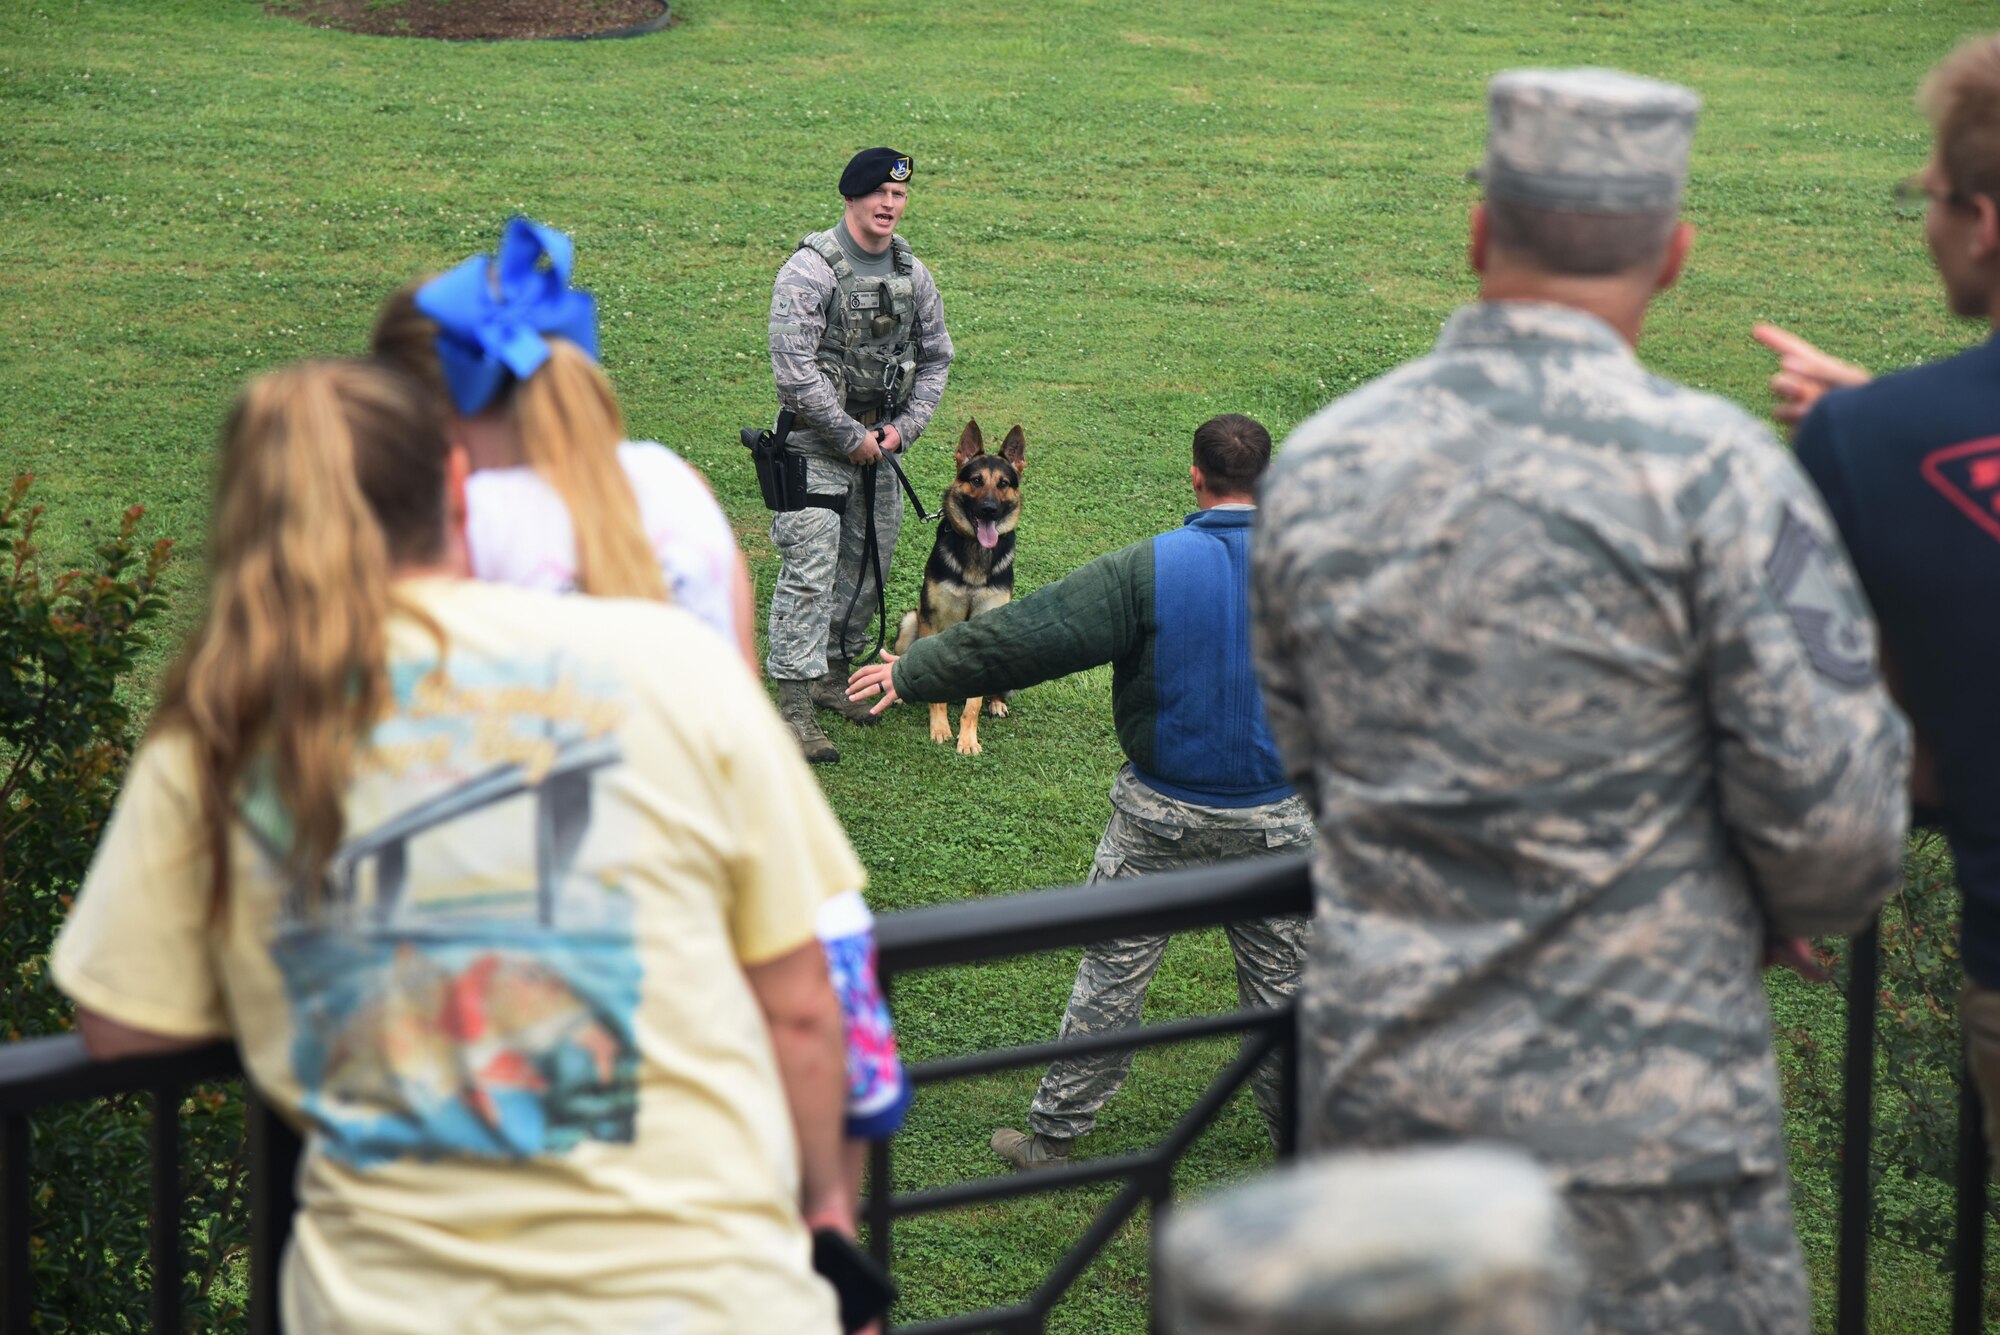 Senior Airman Andrew McCloy, 81st Security Forces Squadron military working dog handler, and his military working dog, Gamma, provide a demonstration during the Keesler Summer Bash at the Bay Breeze Event Center June 1, 2017, on Keesler Air Force Base, Miss. The bash also consisted of a demonstration by the 338th Training Squadron drill team, games and free food. (U.S. Air Force photo by Kemberly Groue)